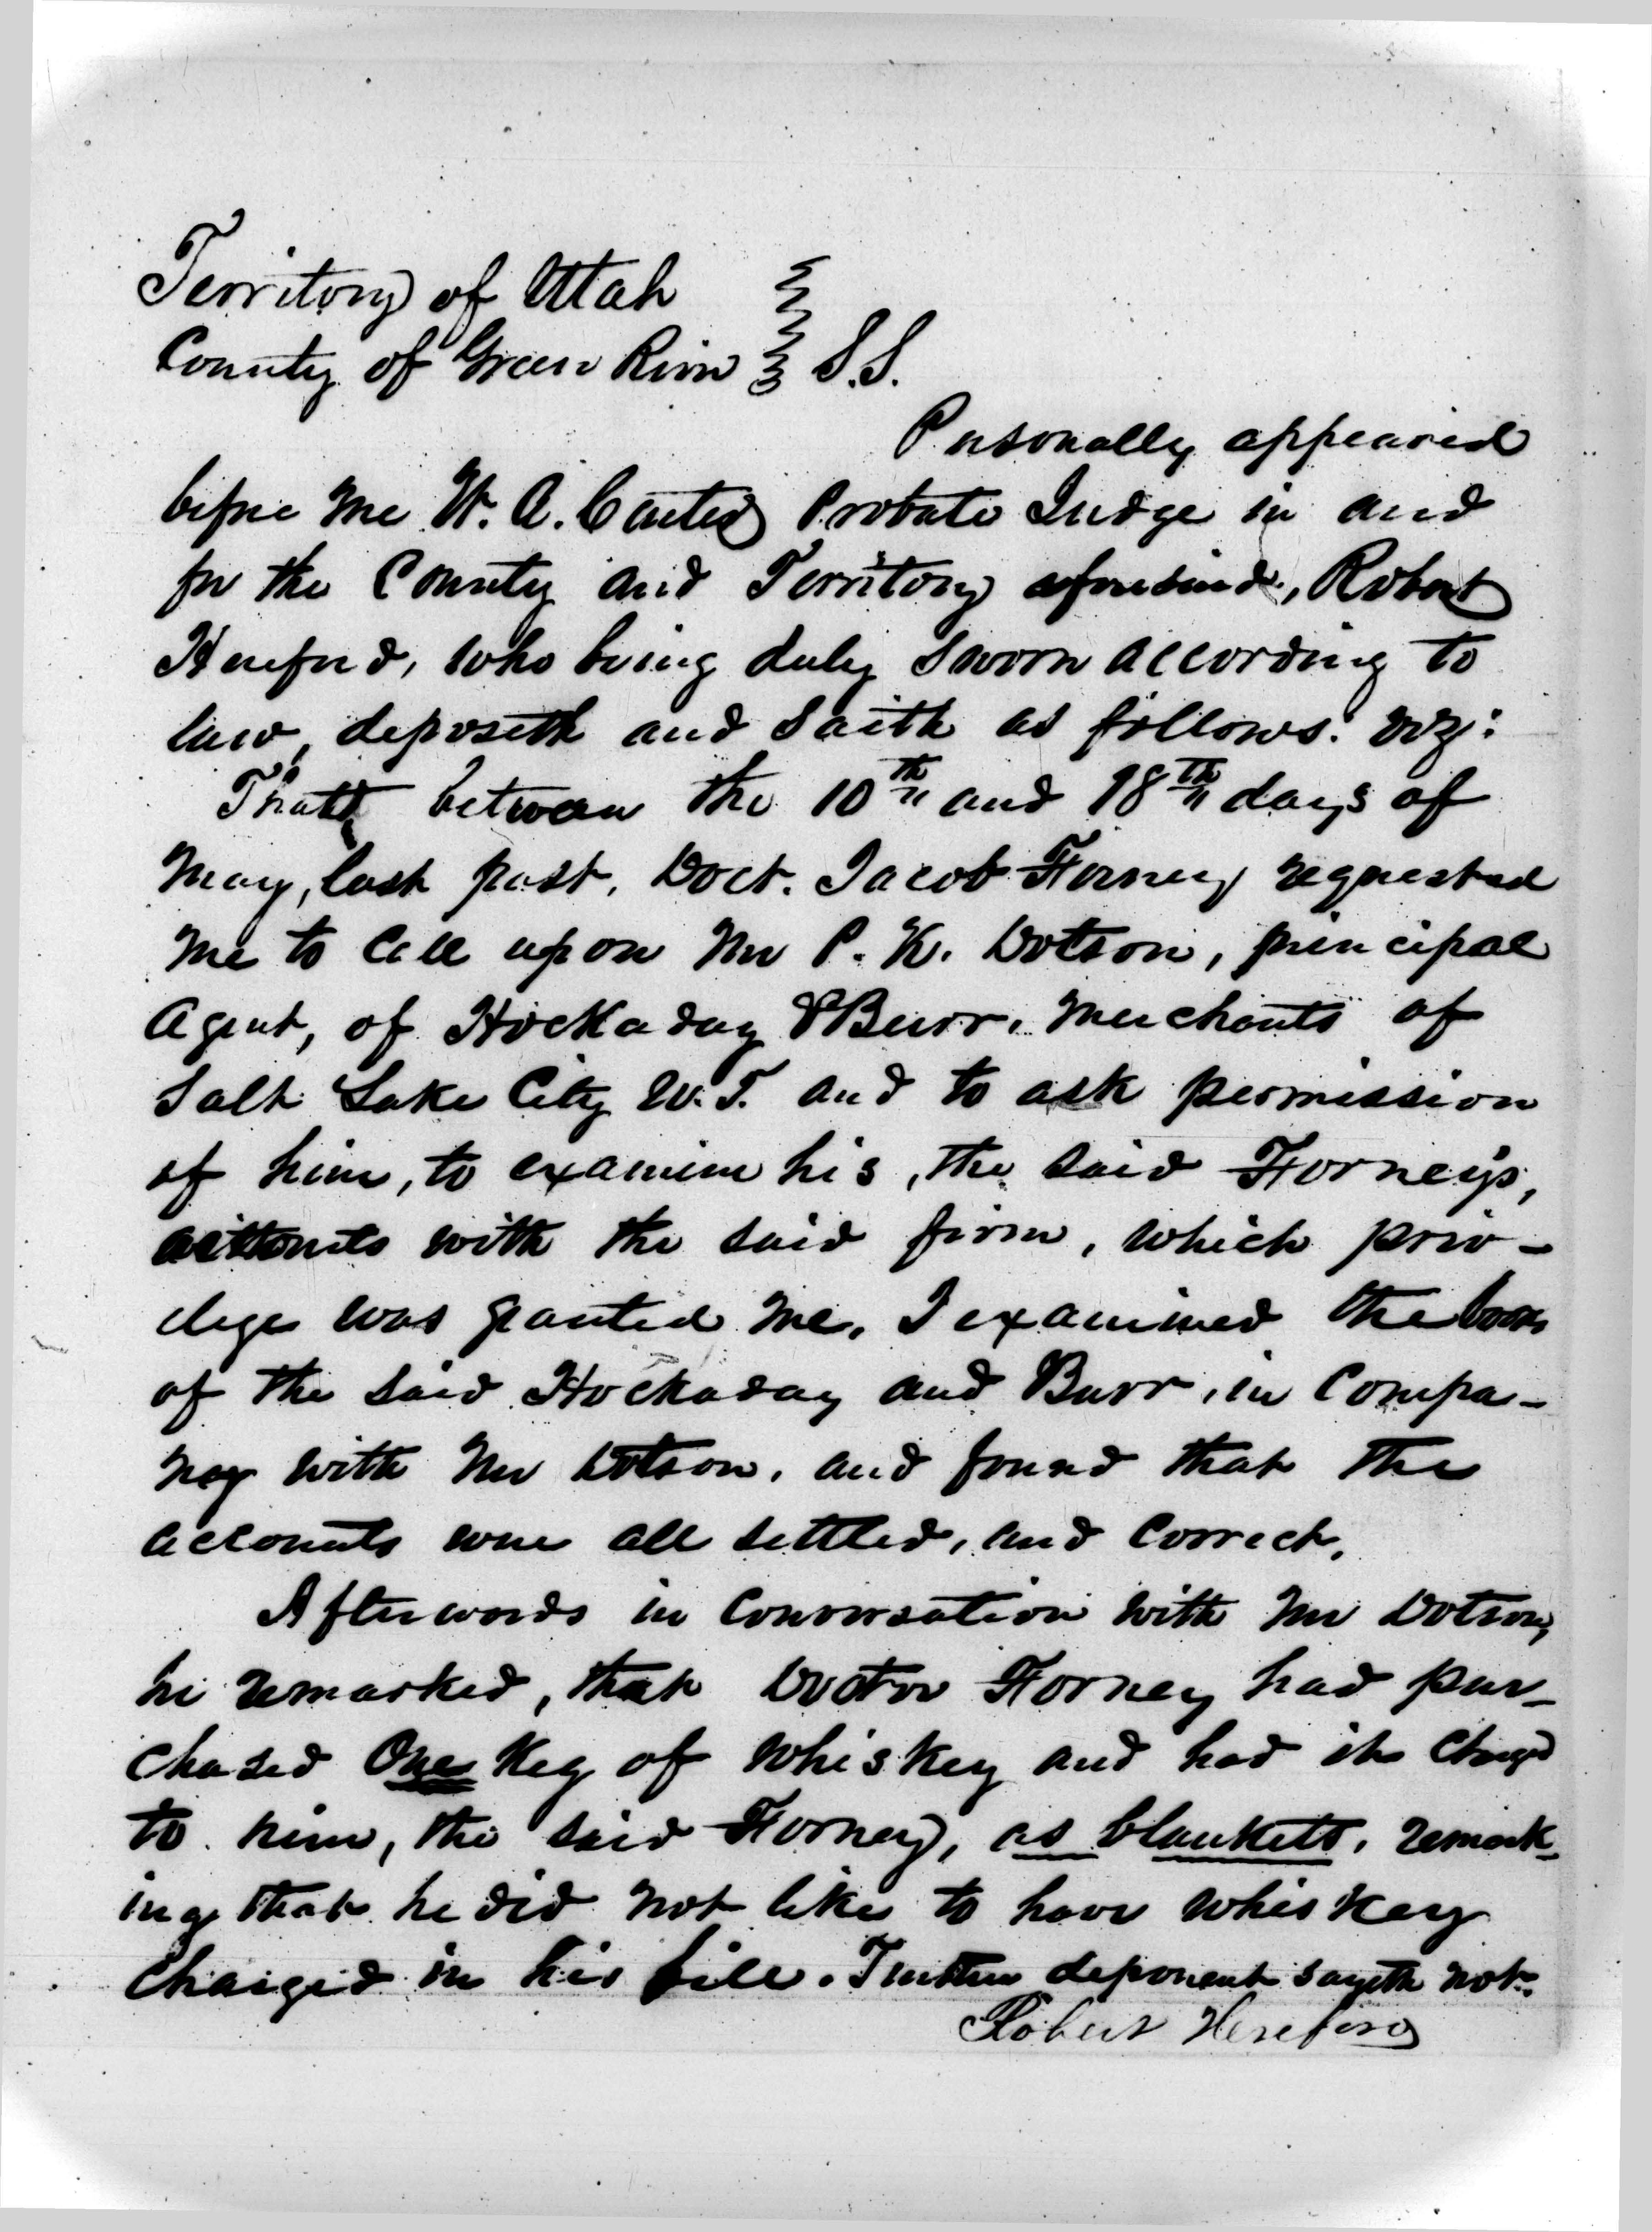 Affidavit of Robert Hereford in Relation to a Charge of the Procurement of Whiskey on Jacob Forney's Account, July 7, 1860